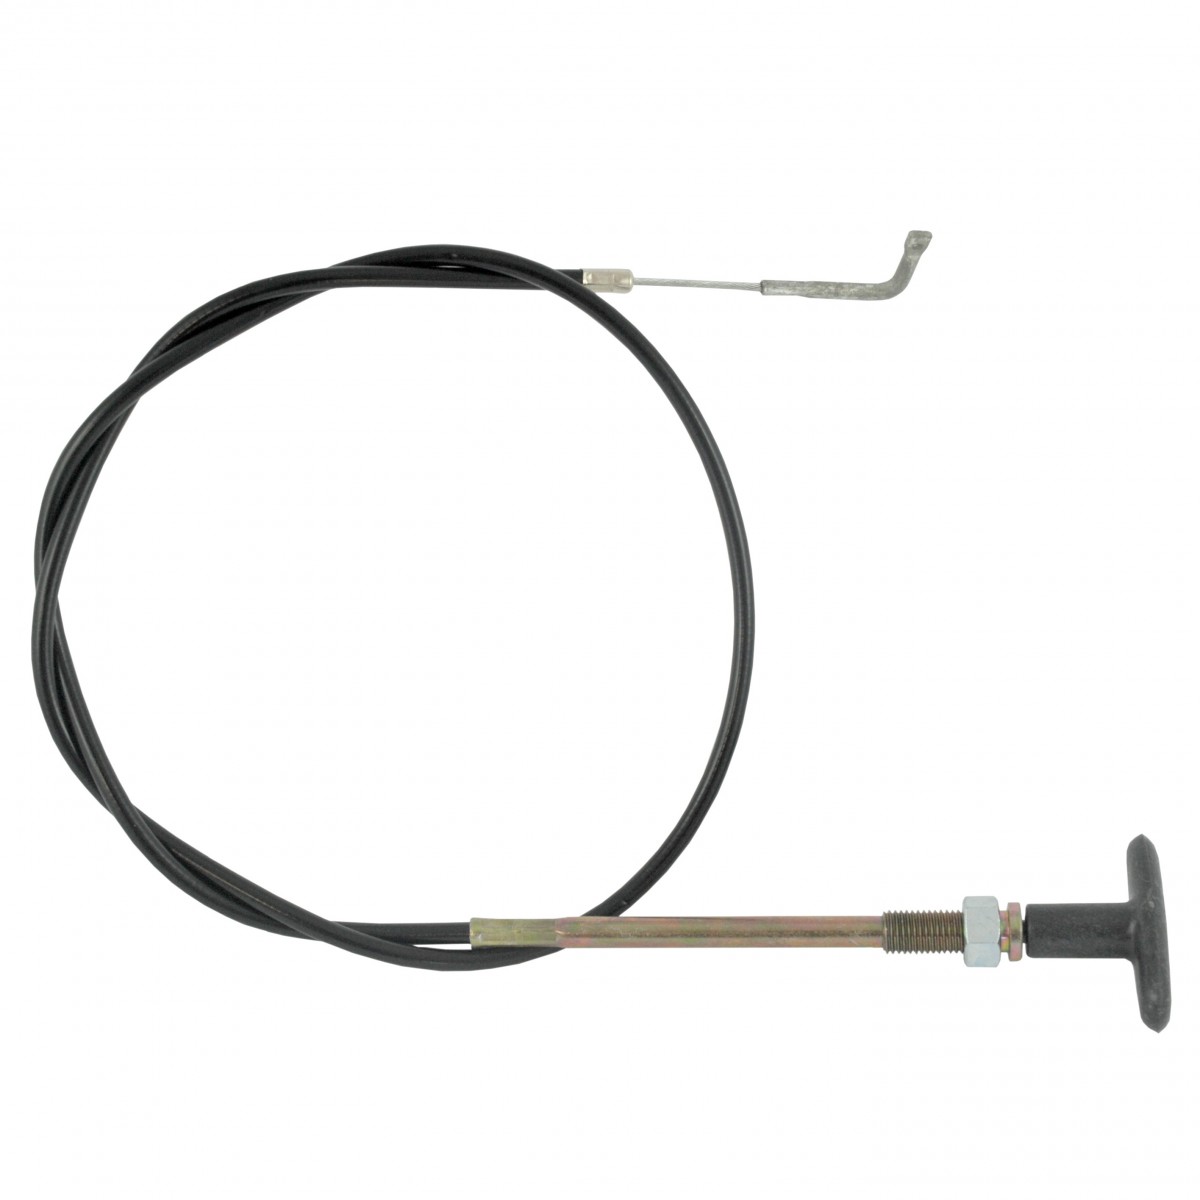 Cable for extinguishing the engine 30 ", 770 mm Iseki TS2510, TS3510